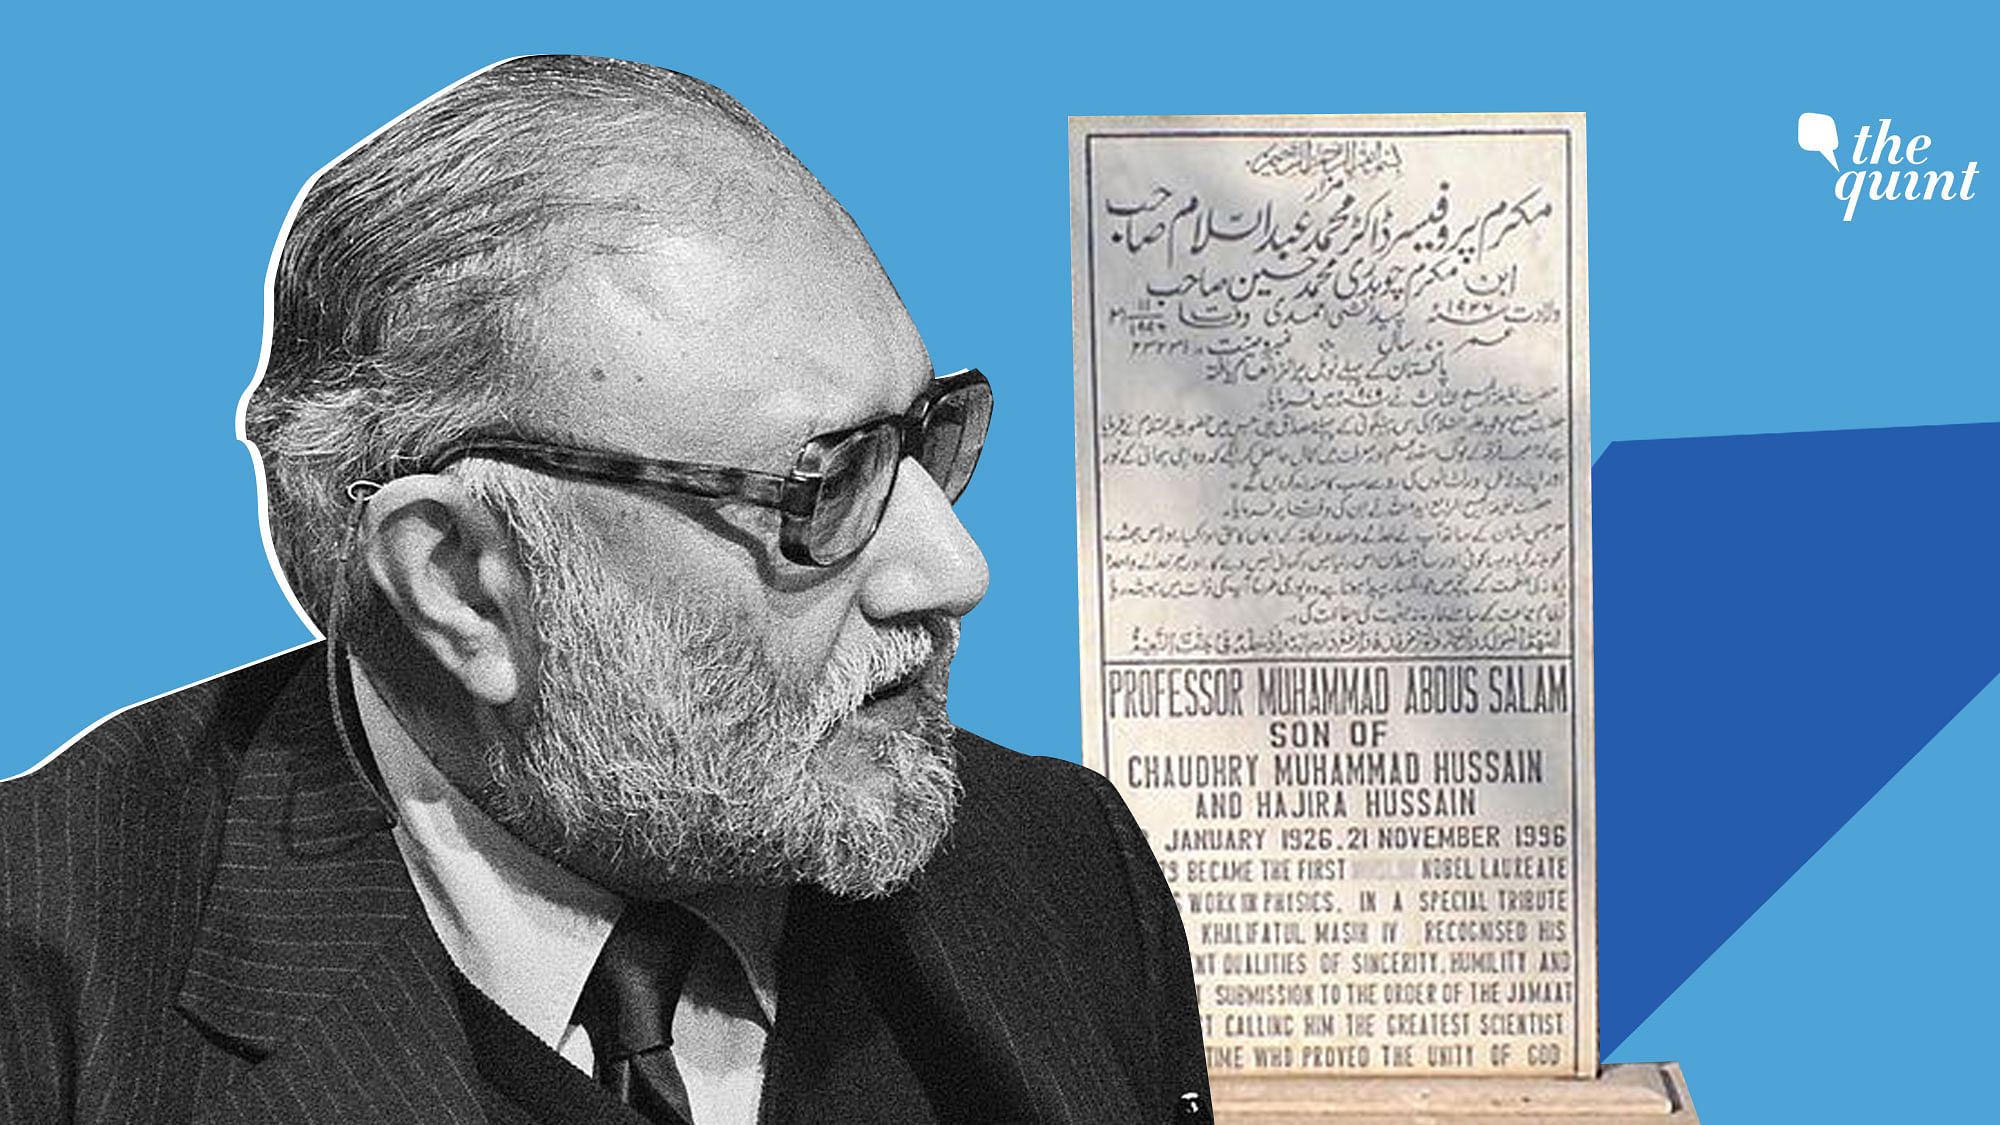 Images — of Pakistani Nobel laureate Dr Abdus Salam, and his gravestone which was defaced — used for representational purposes.